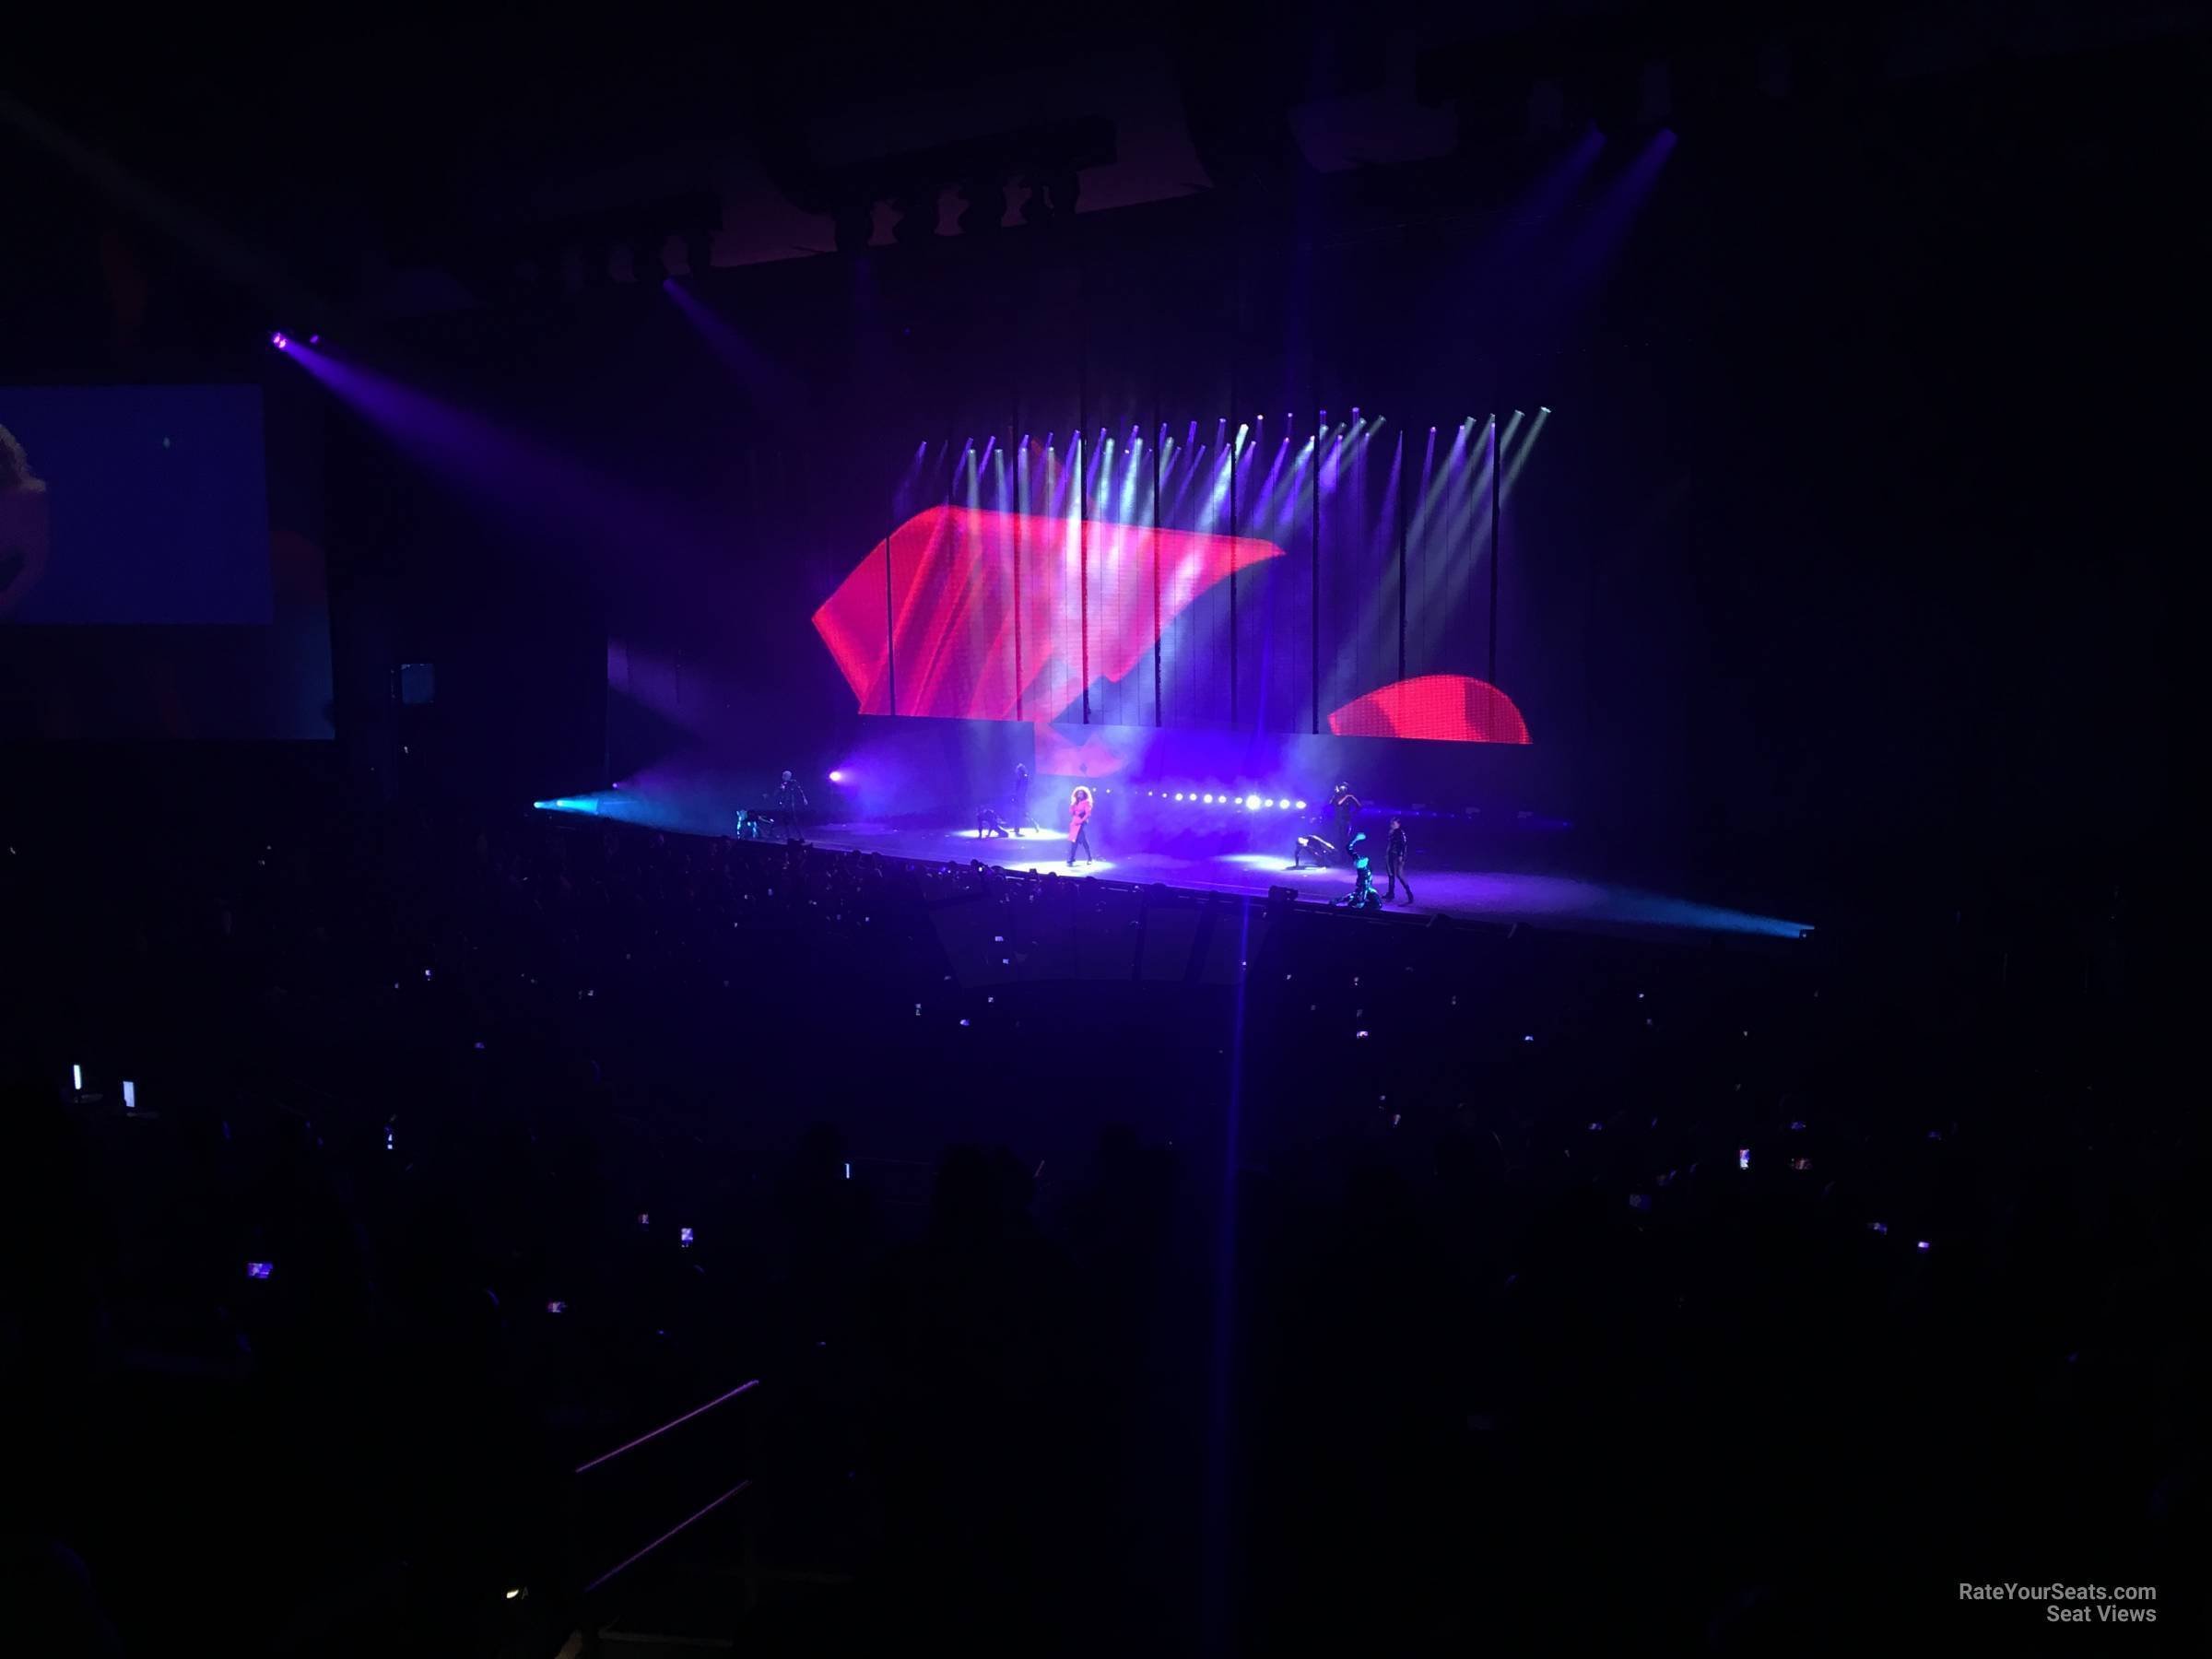 section 302, row f seat view  - dolby live at park mgm